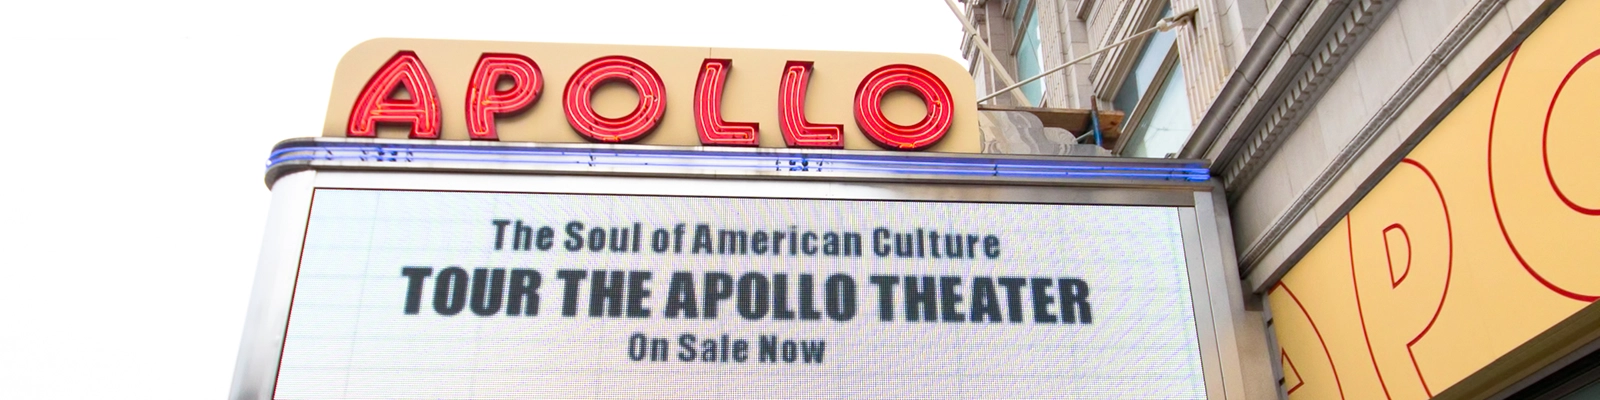 Apollo Theater, a historic music venue known for launching the careers of many famous artists